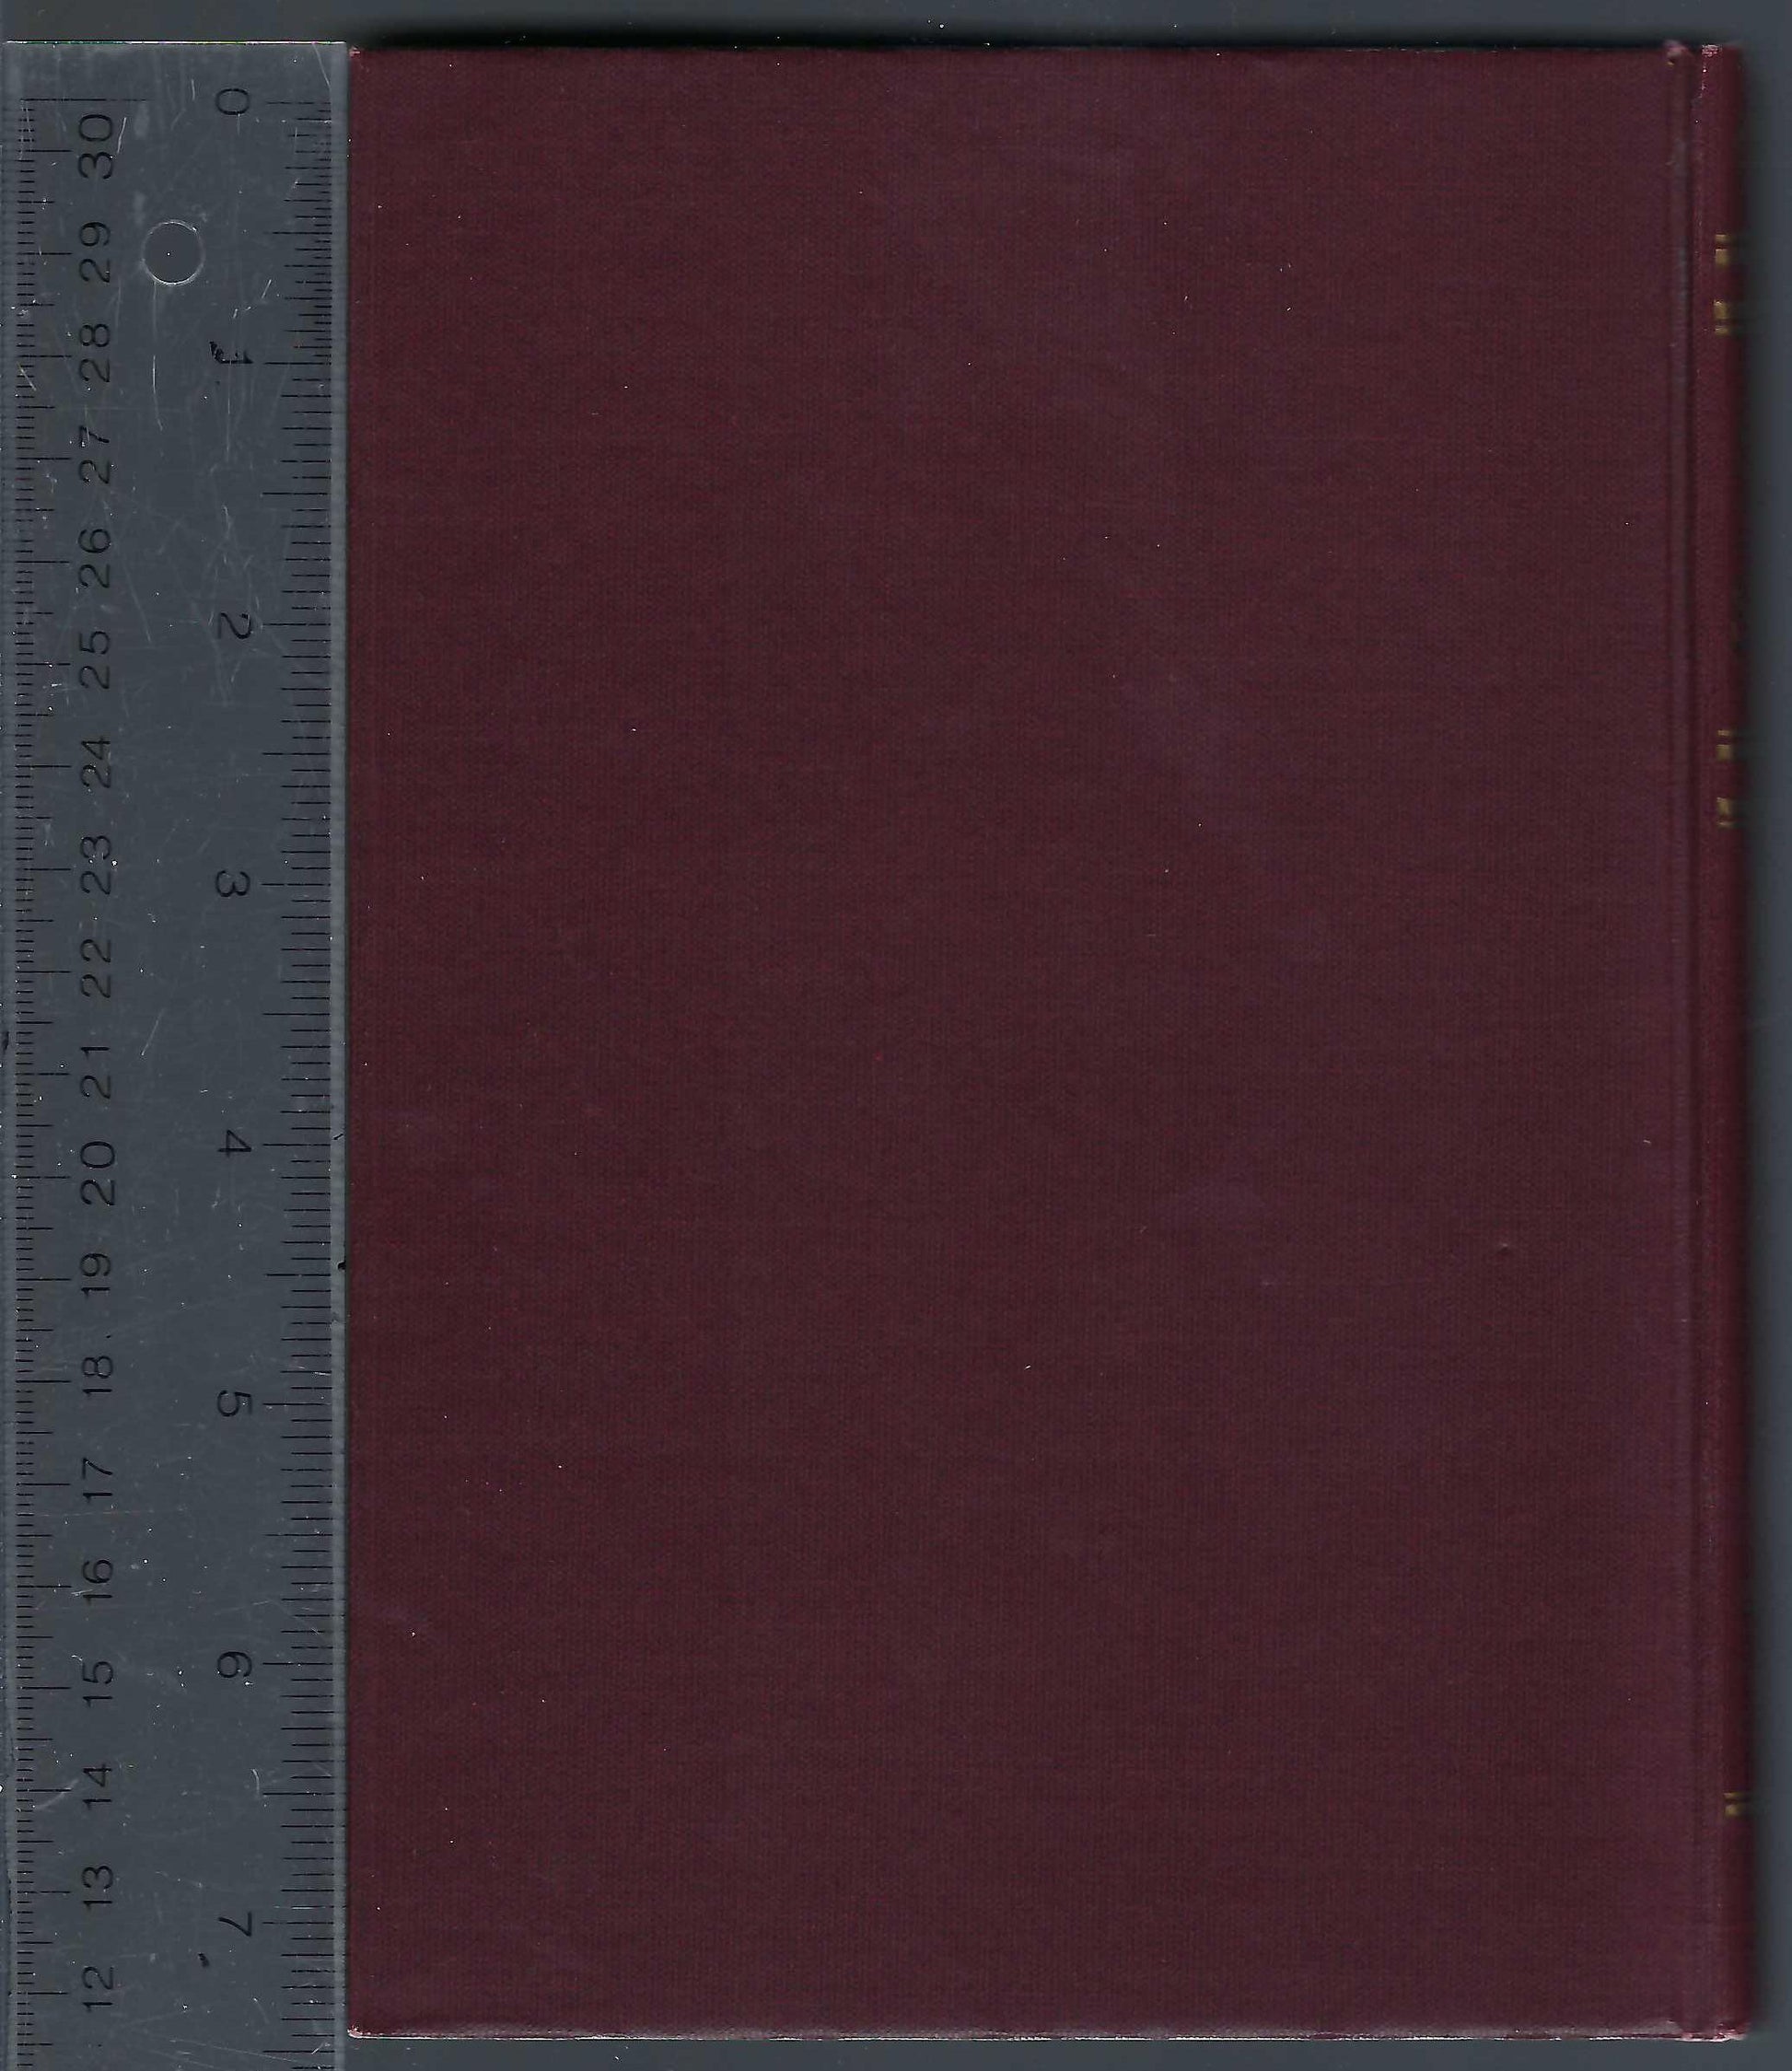 Sixes and Sevens rear cover